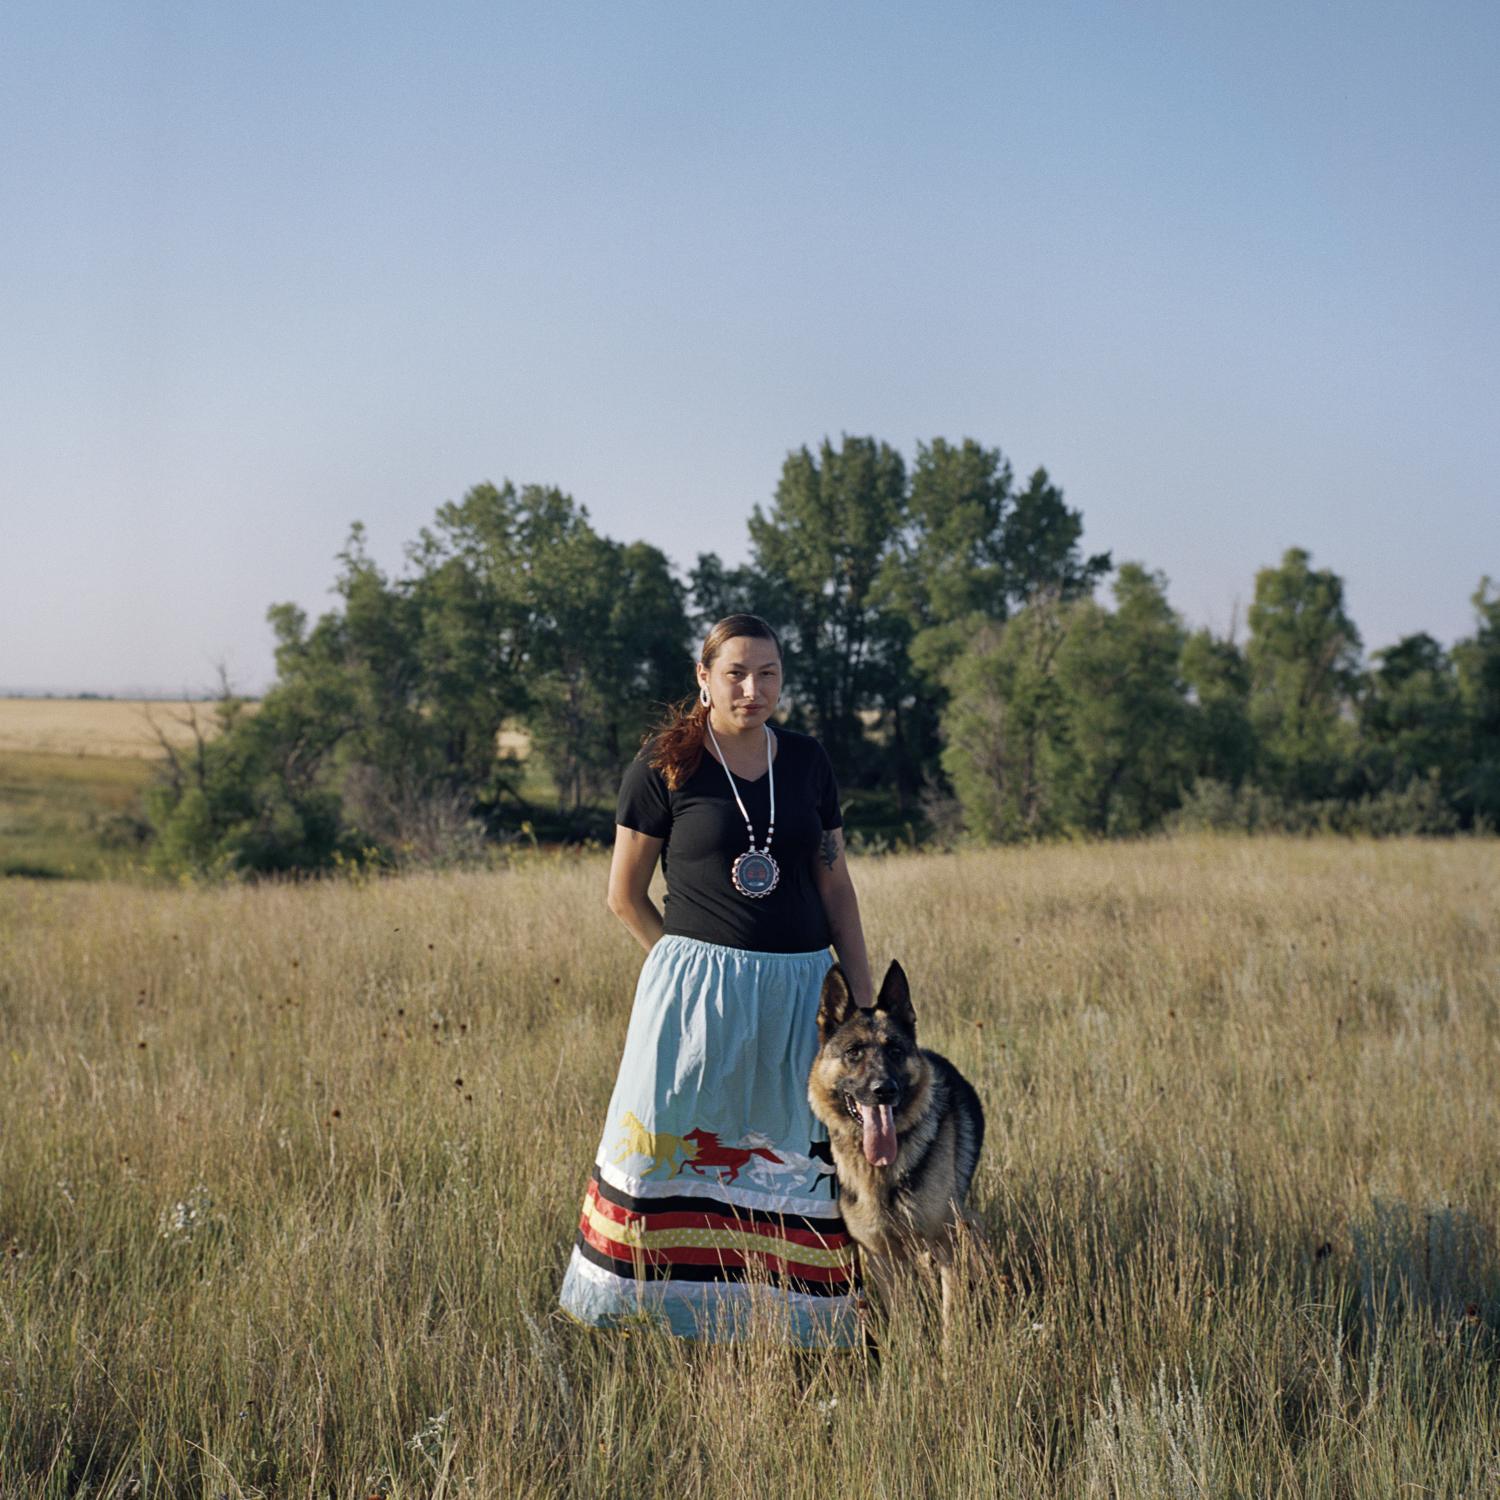 The Bakken oil shale's impact on Native American women - Heather Belgrade, 23, with her dog, Vador, near her home...